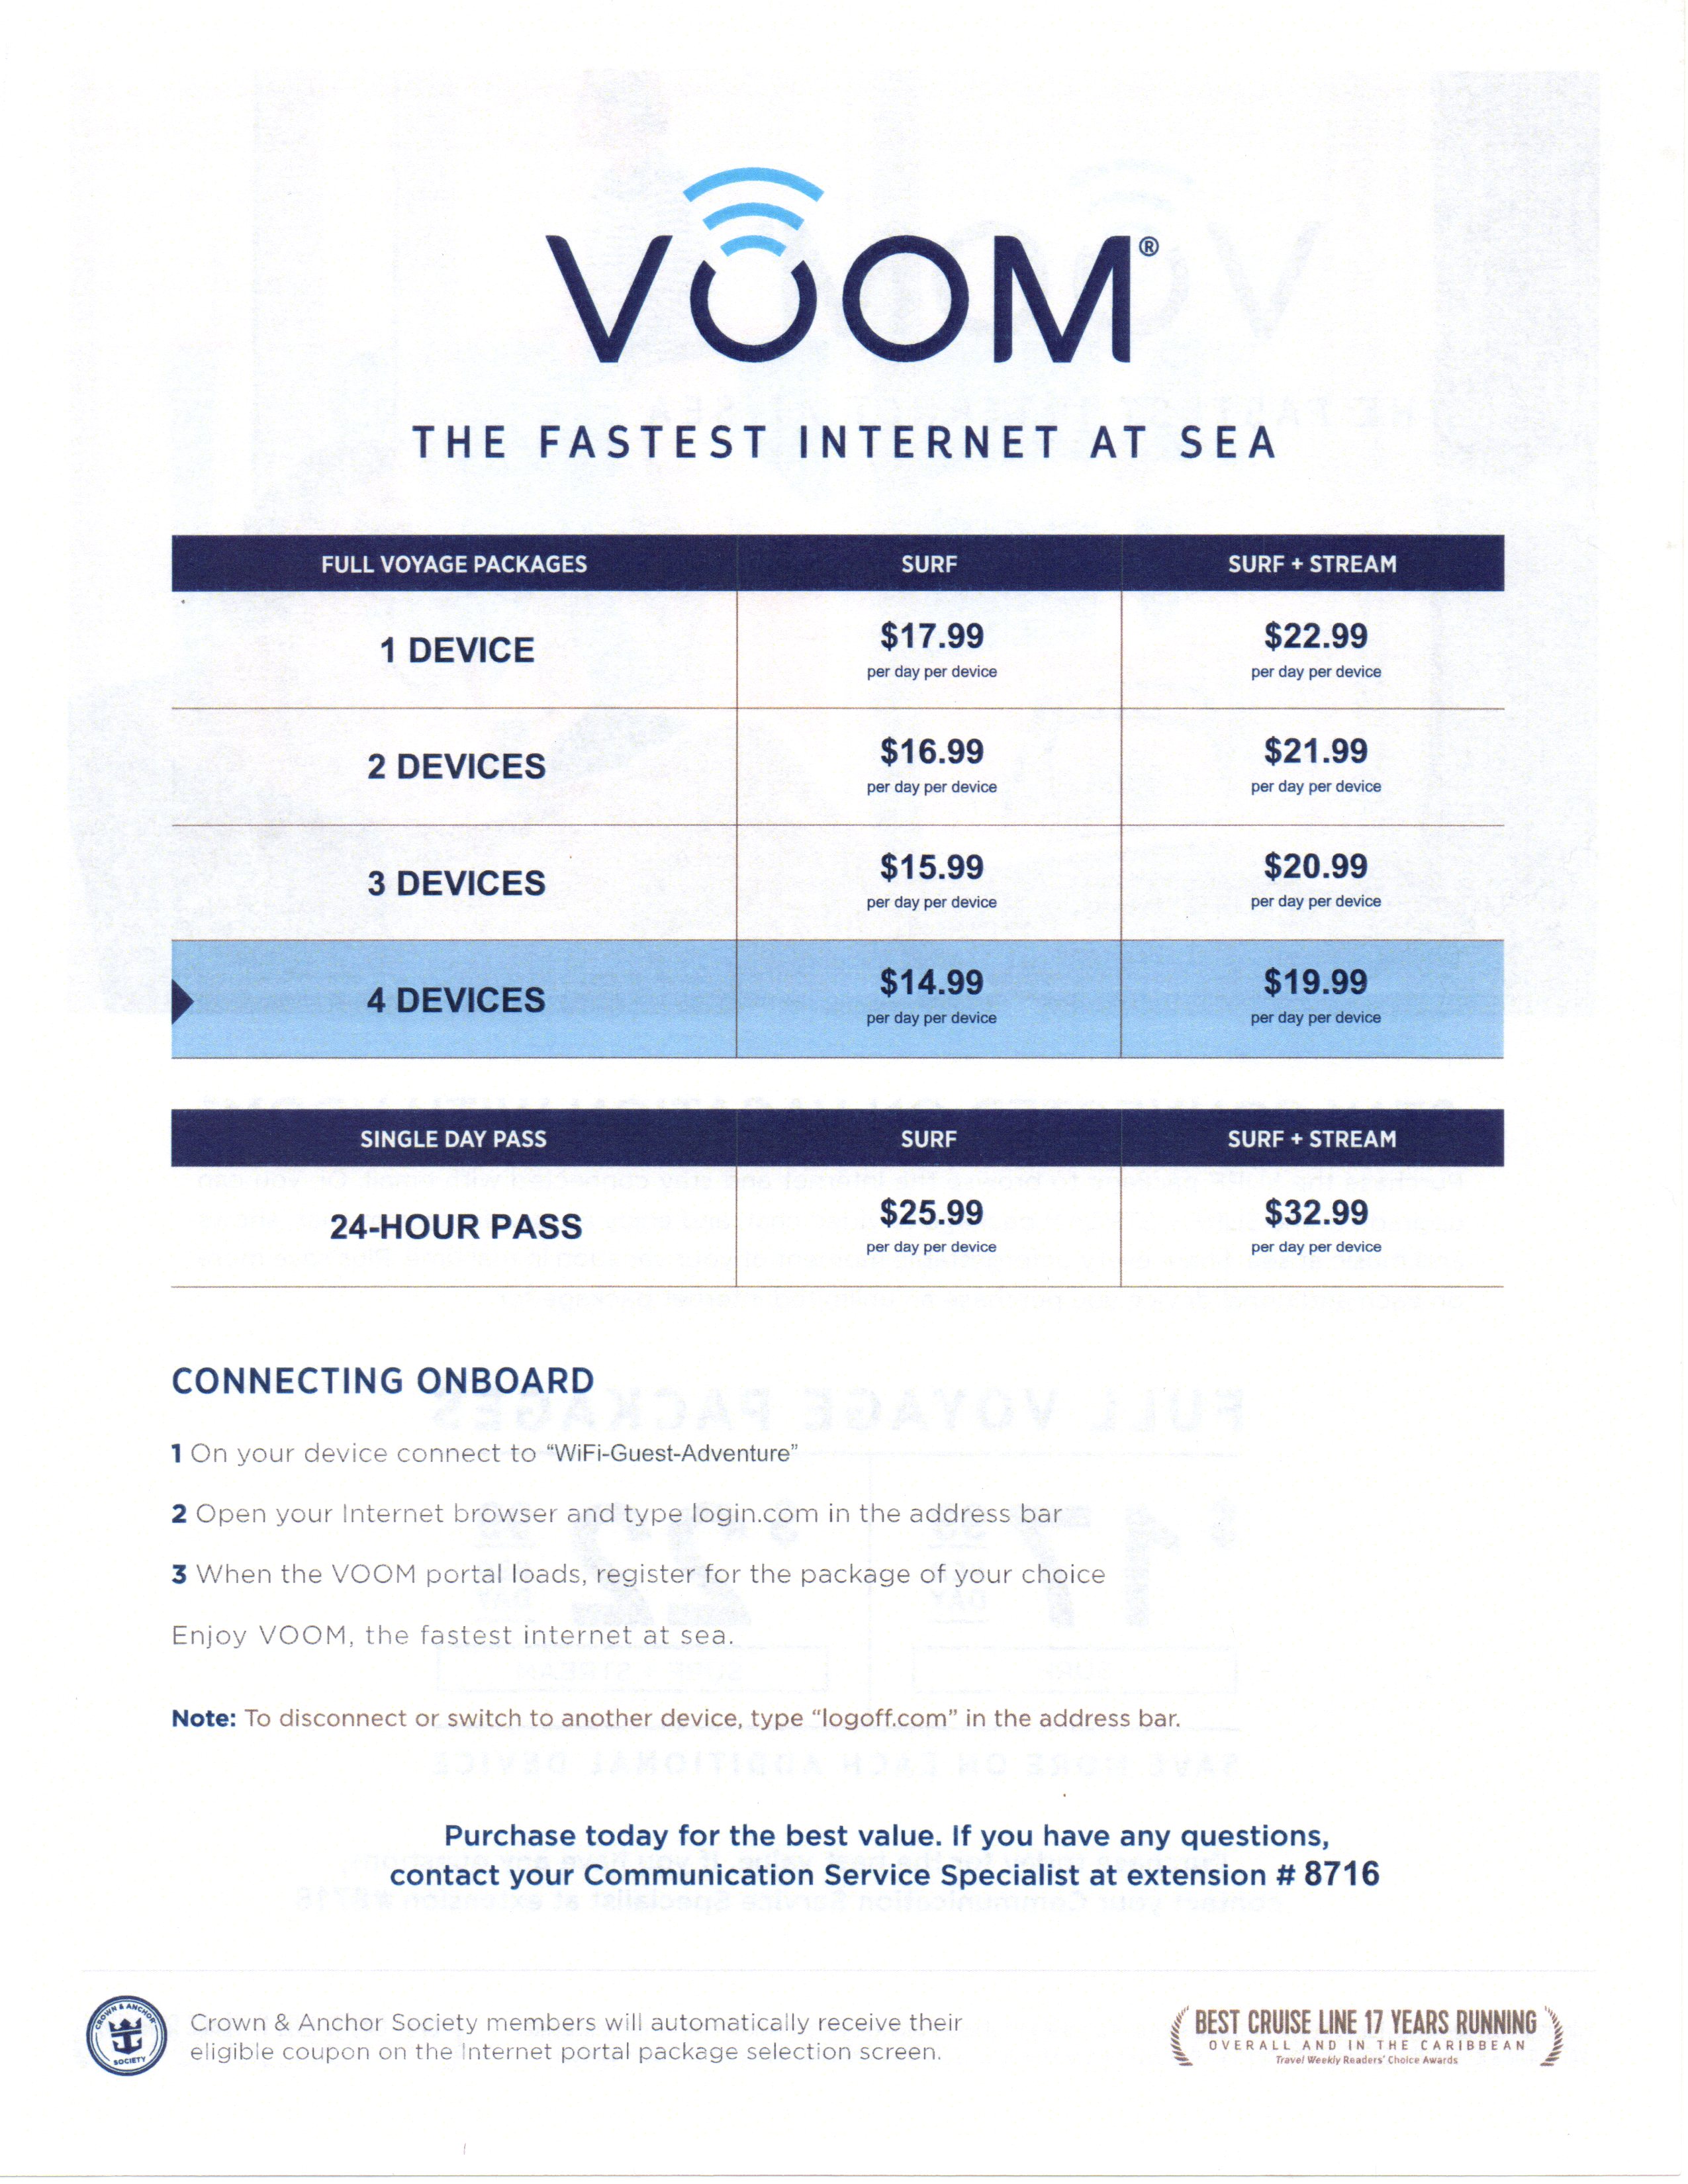 royal caribbean cruise voom cost